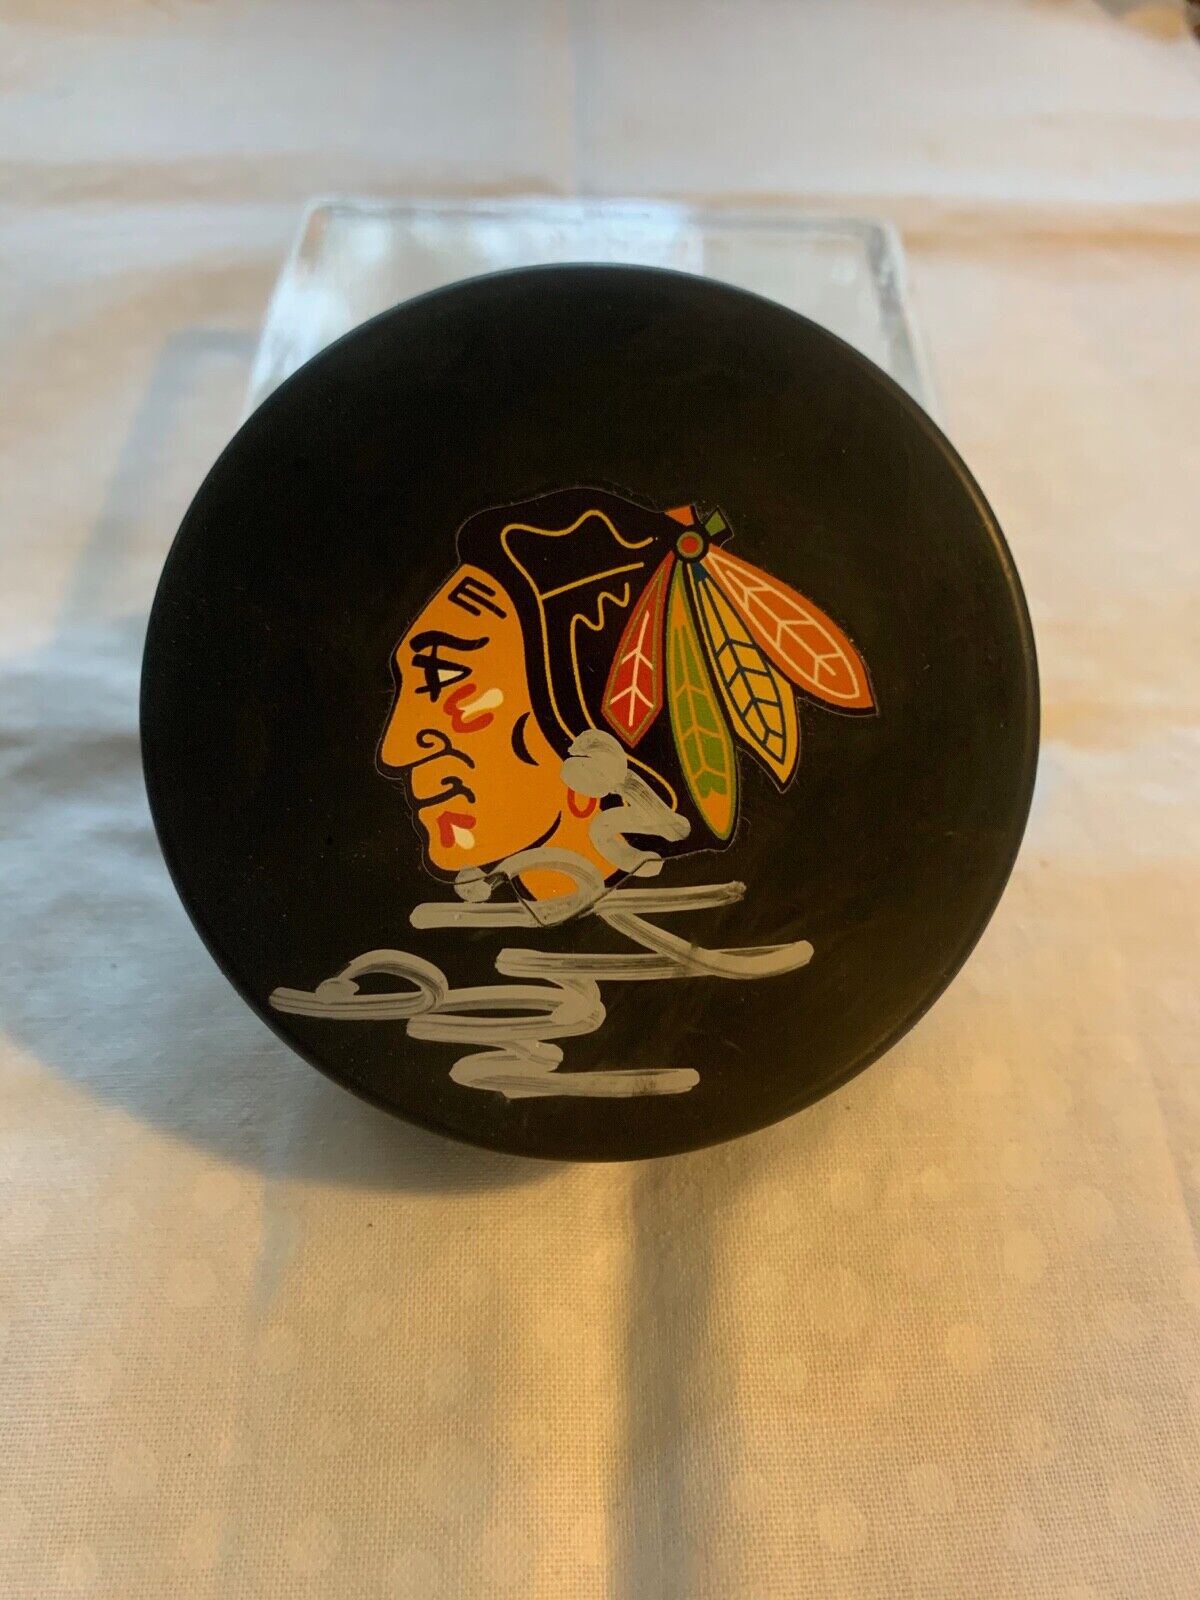 Chicago Blackhawks Puck Autographed by Martin Lapointe w/ All Sports COA